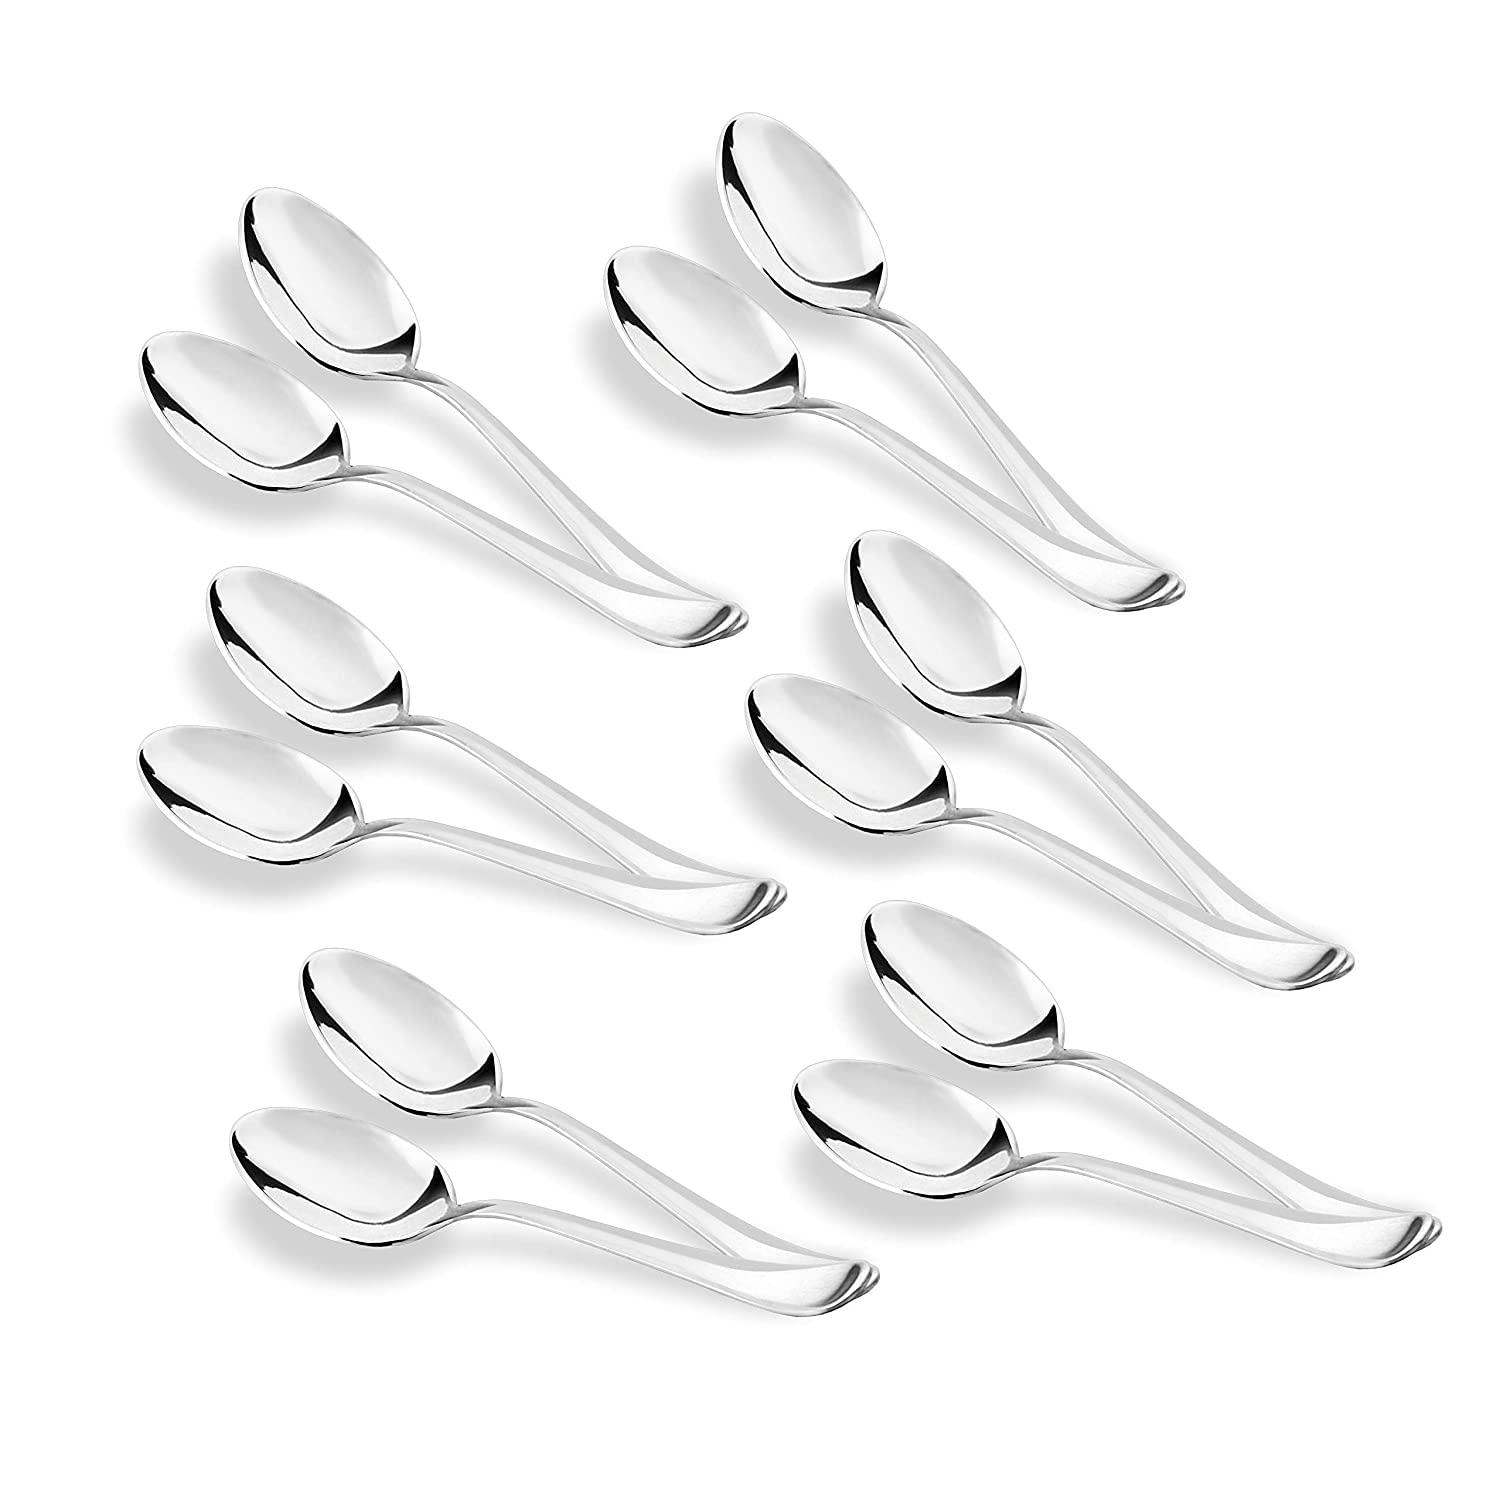 Stainless Steel Assorted Design Dinnerware Table Spoon (16 Cm, Silver) - Walgrow.com